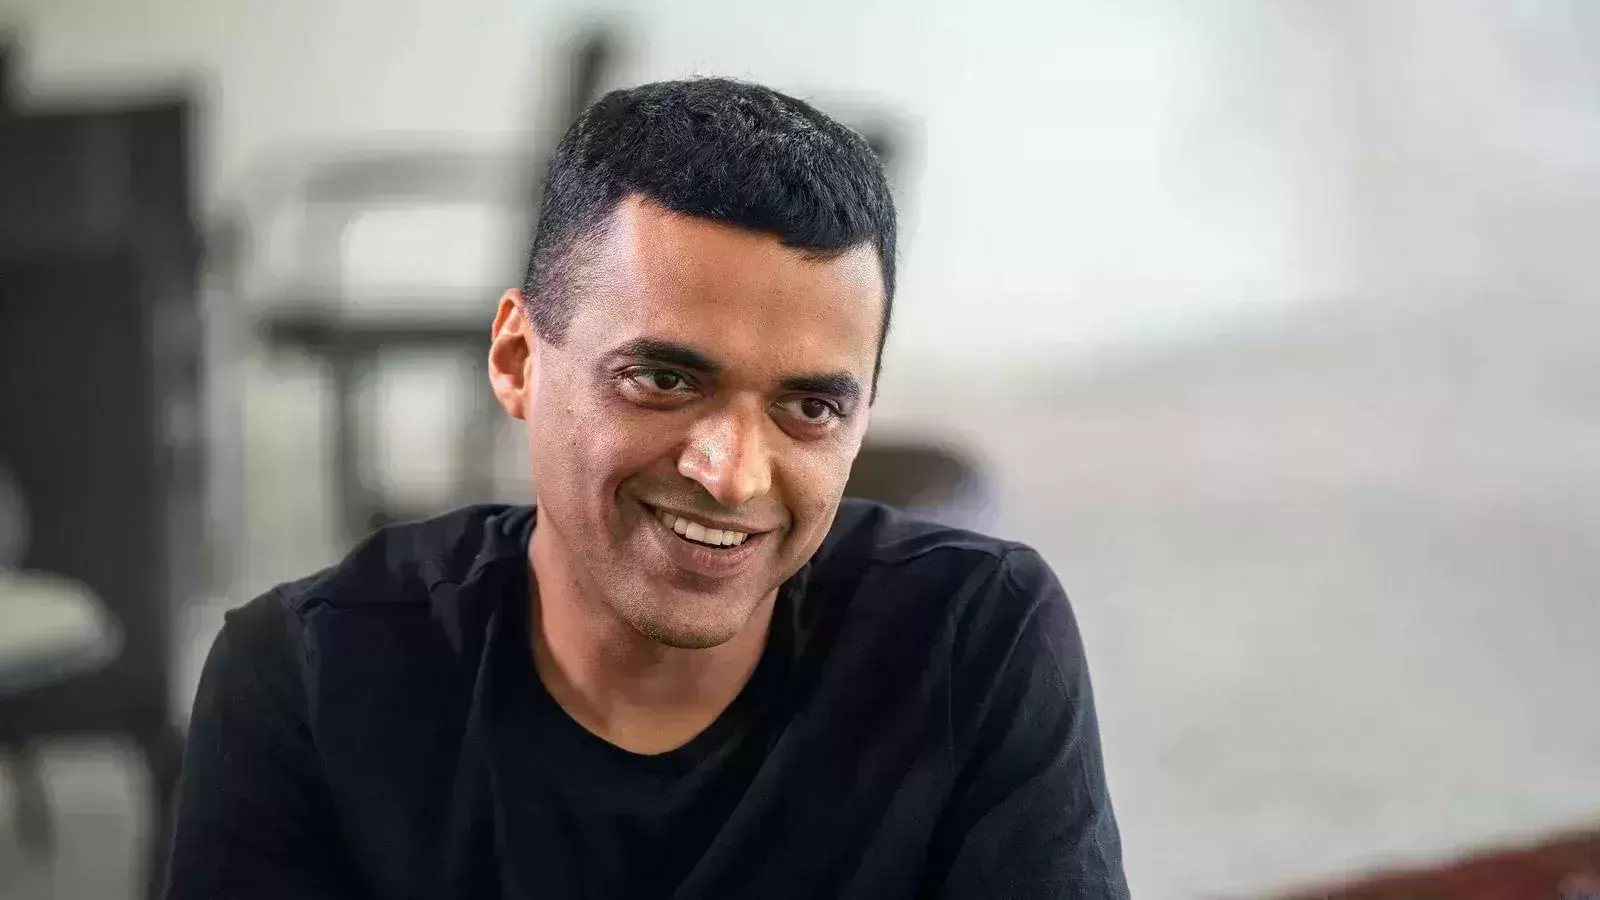 Zomato hires chief fitness officer as CEO Deepinder Goyal loses 15 kg